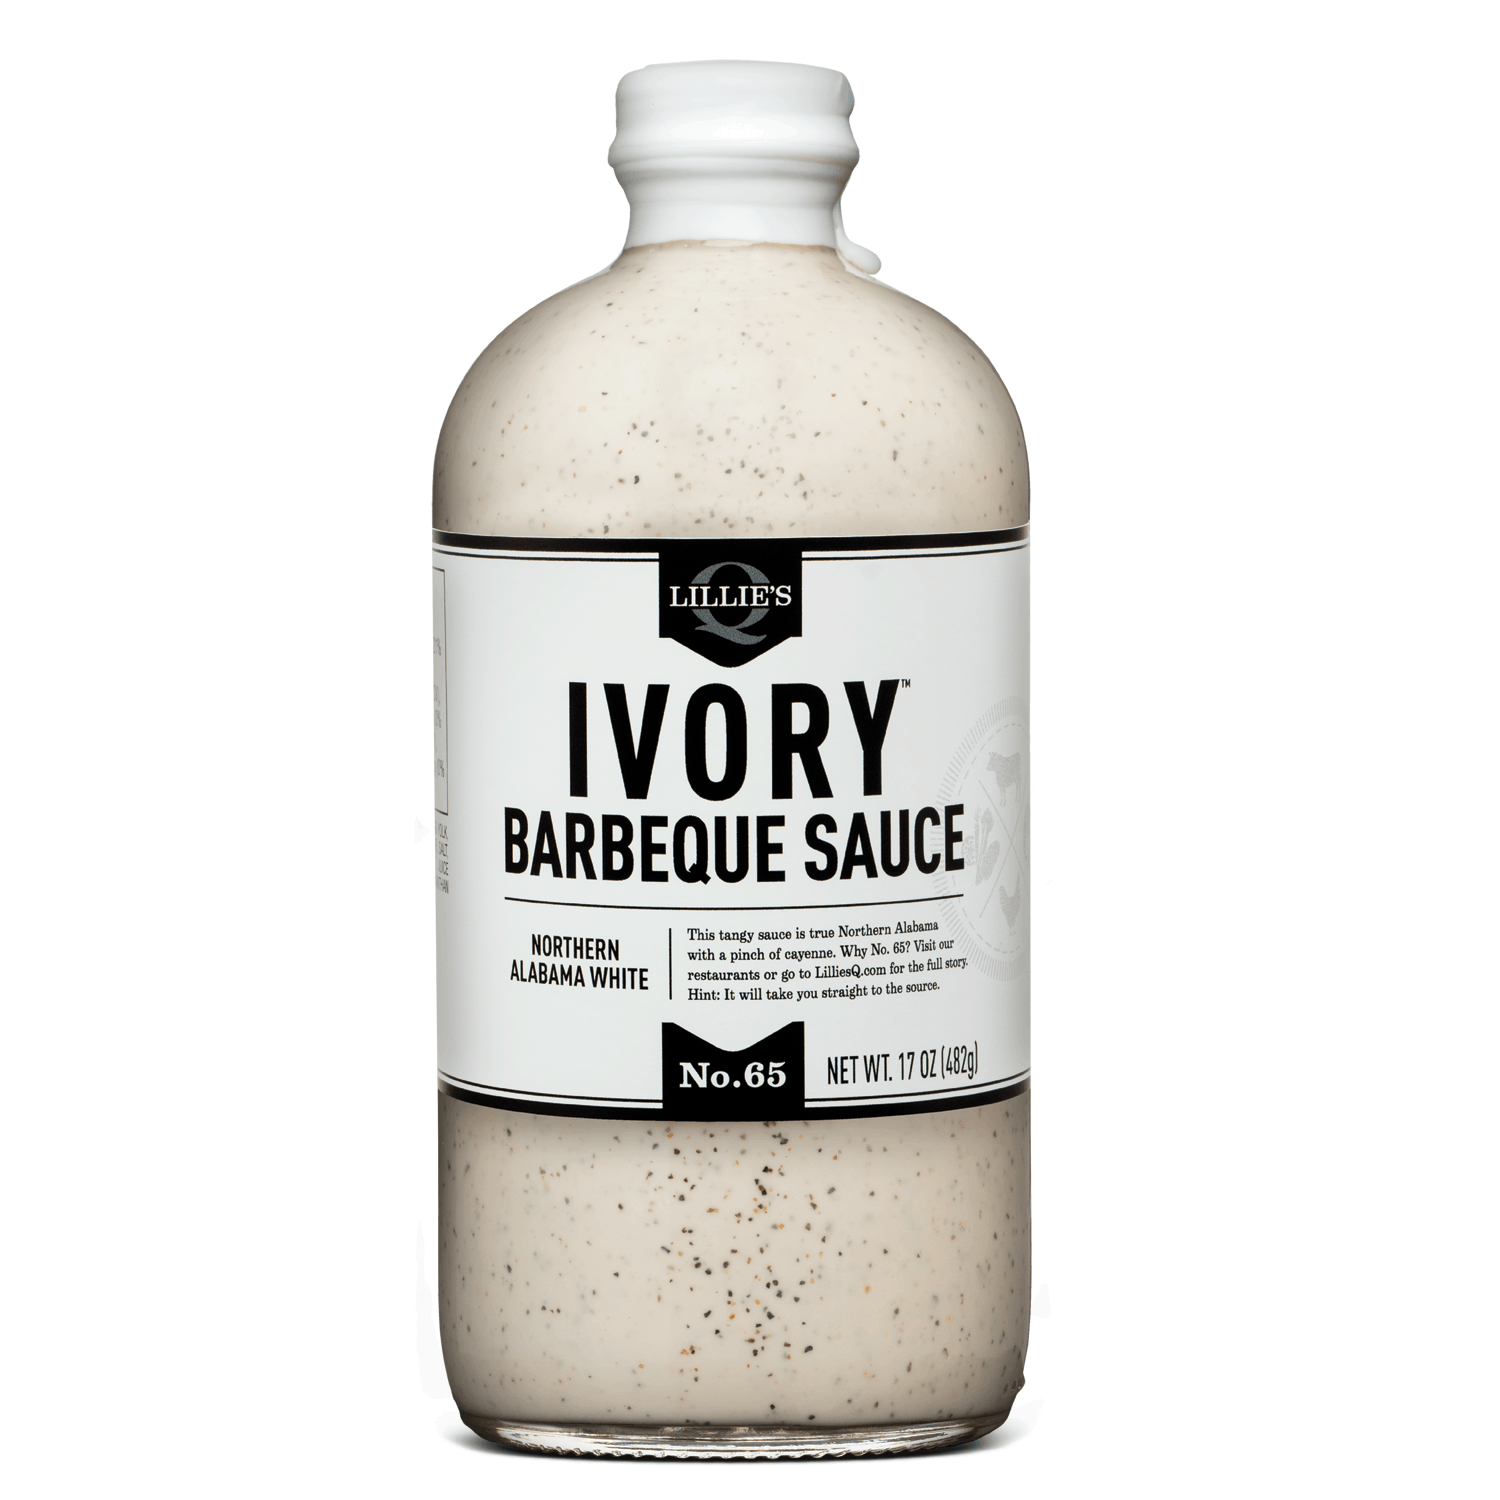 Lillie’s Q Ivory Barbeque Sauce